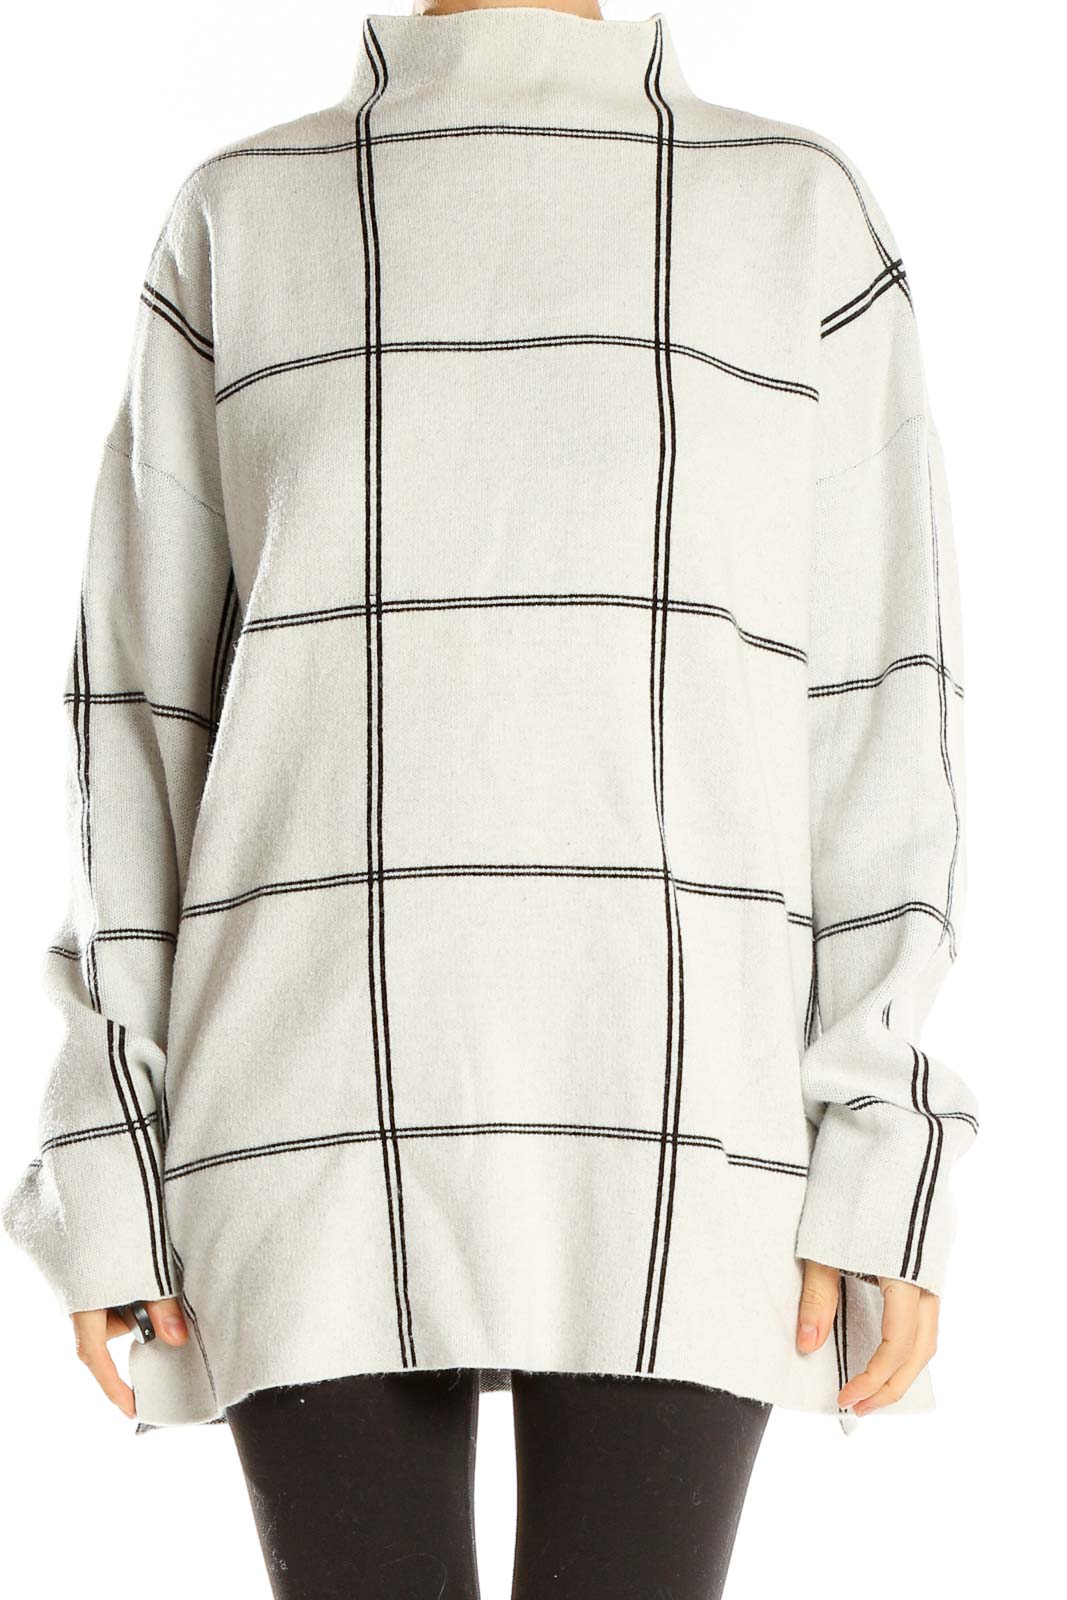 White High Neck Check Print Sweater Front